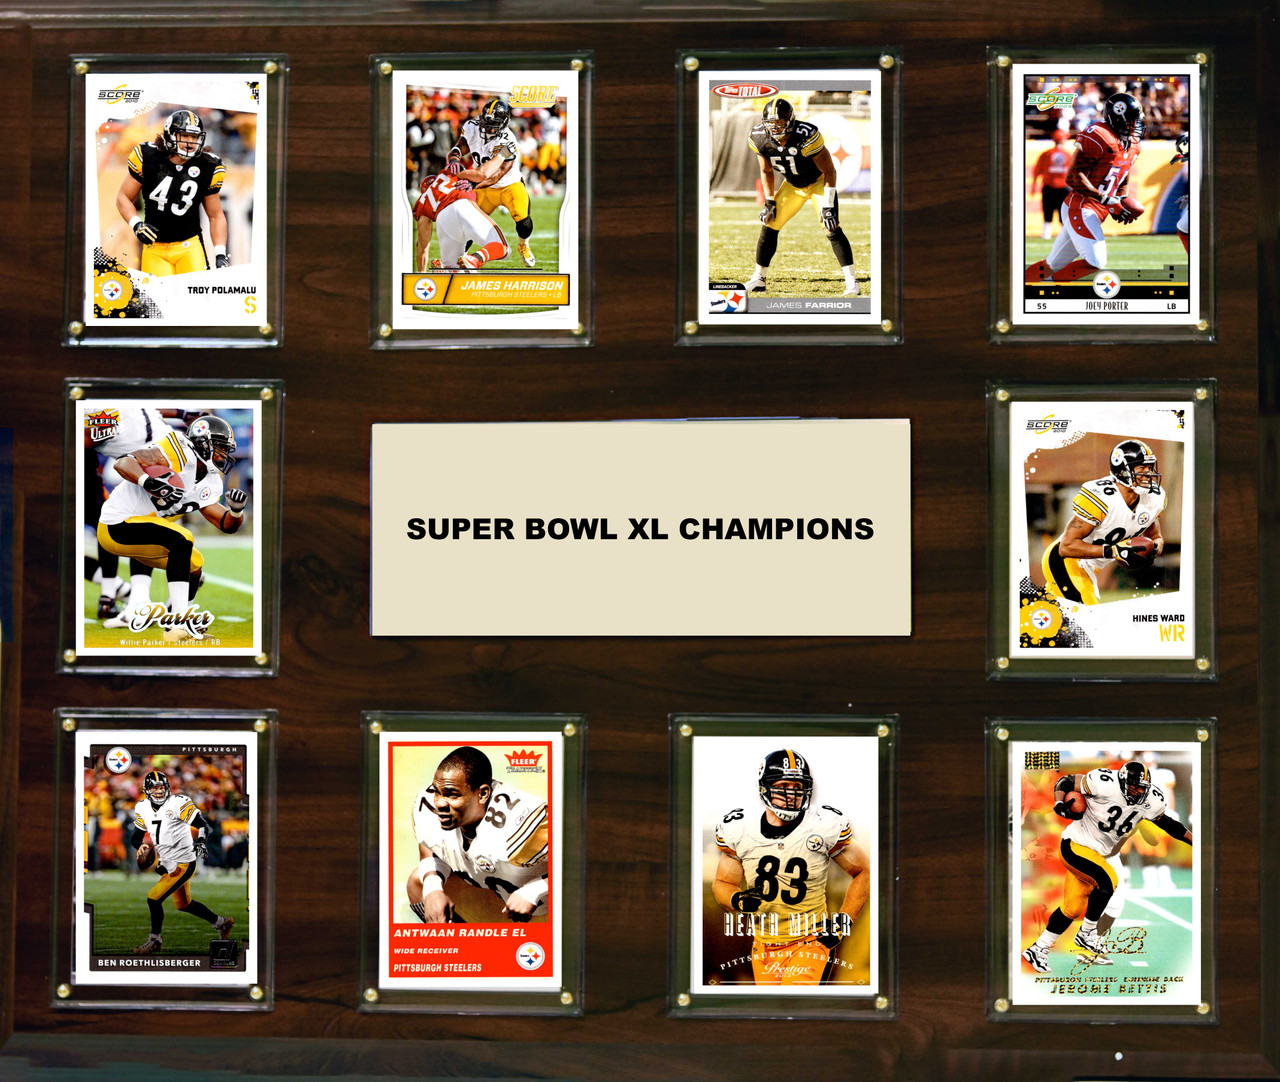 NFL 15"x18" Pittsburgh Steelers Super Bowl 40 - 10-Card Plaque